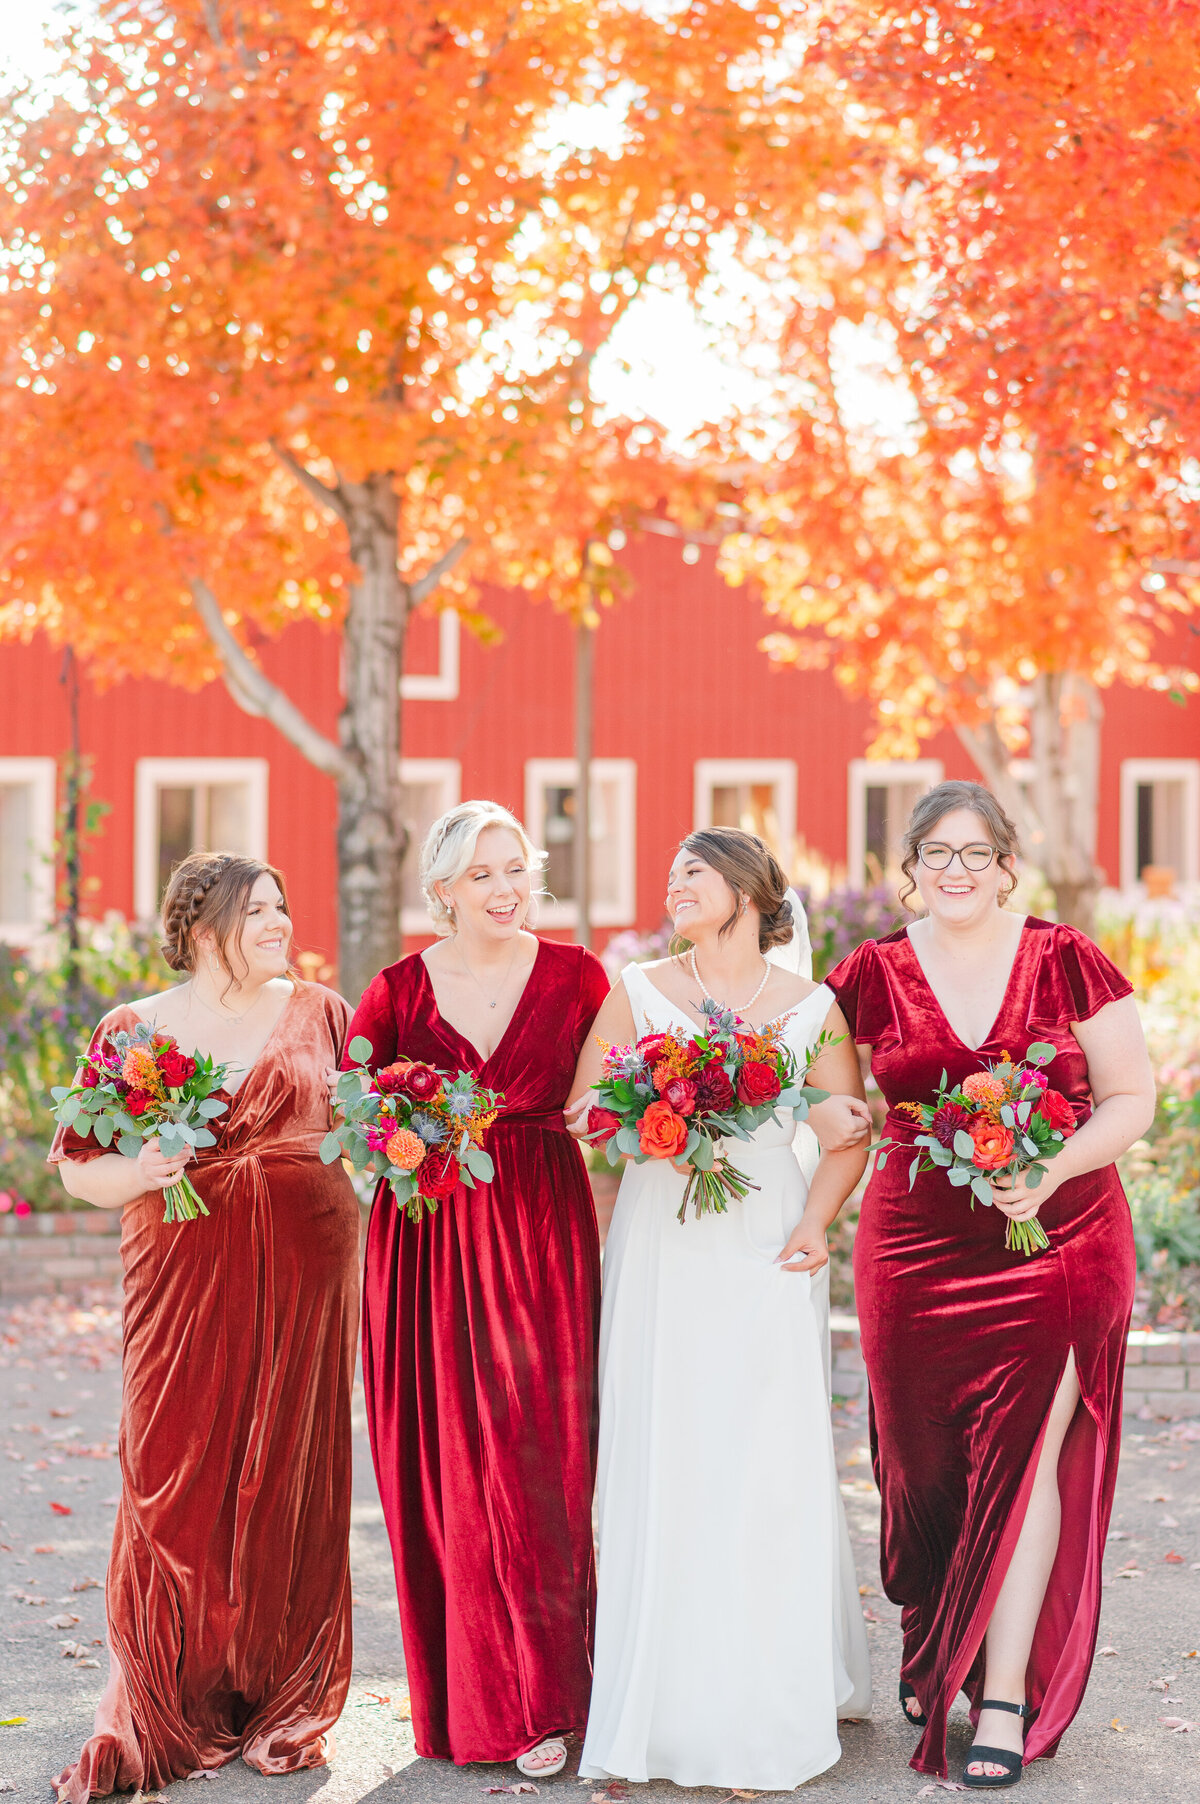 Bride and bridesmaids wearing fall colors during a fall wedding at Crooked Willow Farms.